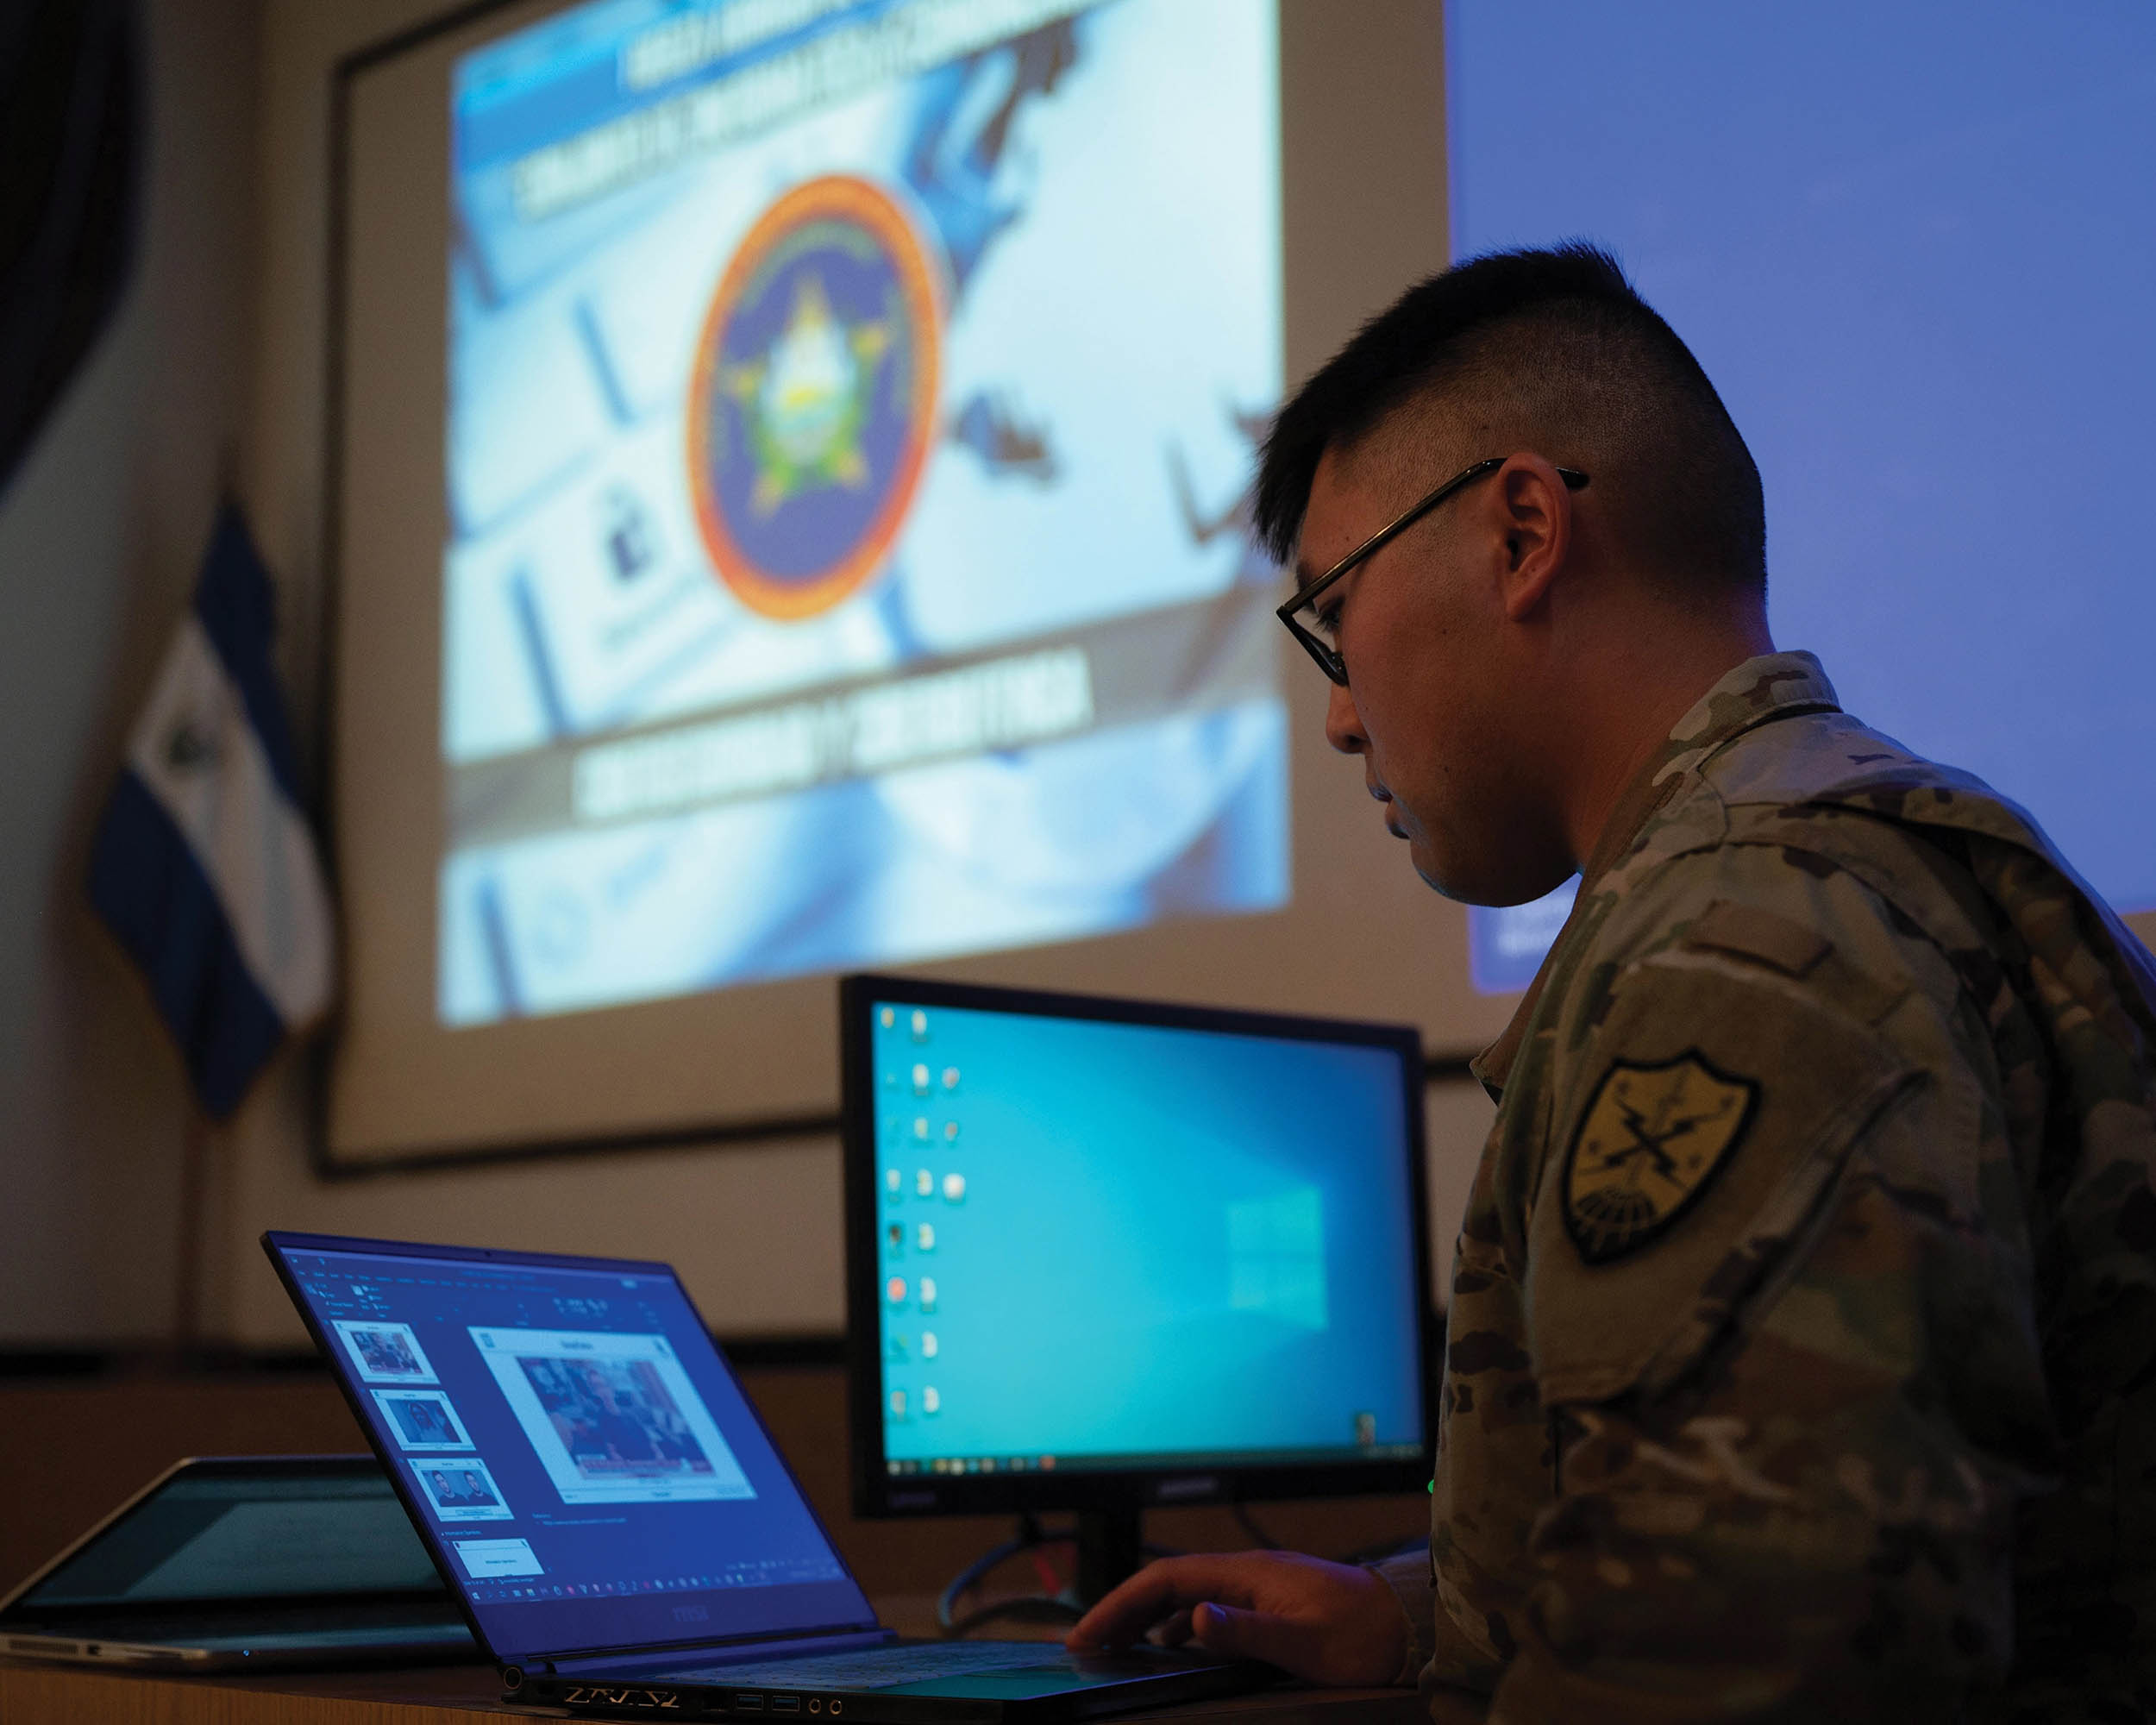 Sergeant Adam Dorian Wong, threat researcher with 136th Cybersecurity Unit, presents new topics of interest including artificial intelligence and vulnerability identification to Salvadoran cyber security unit in El Salvador, December 7, 2022 (U.S. Air National Guard/Victoria Nelson)